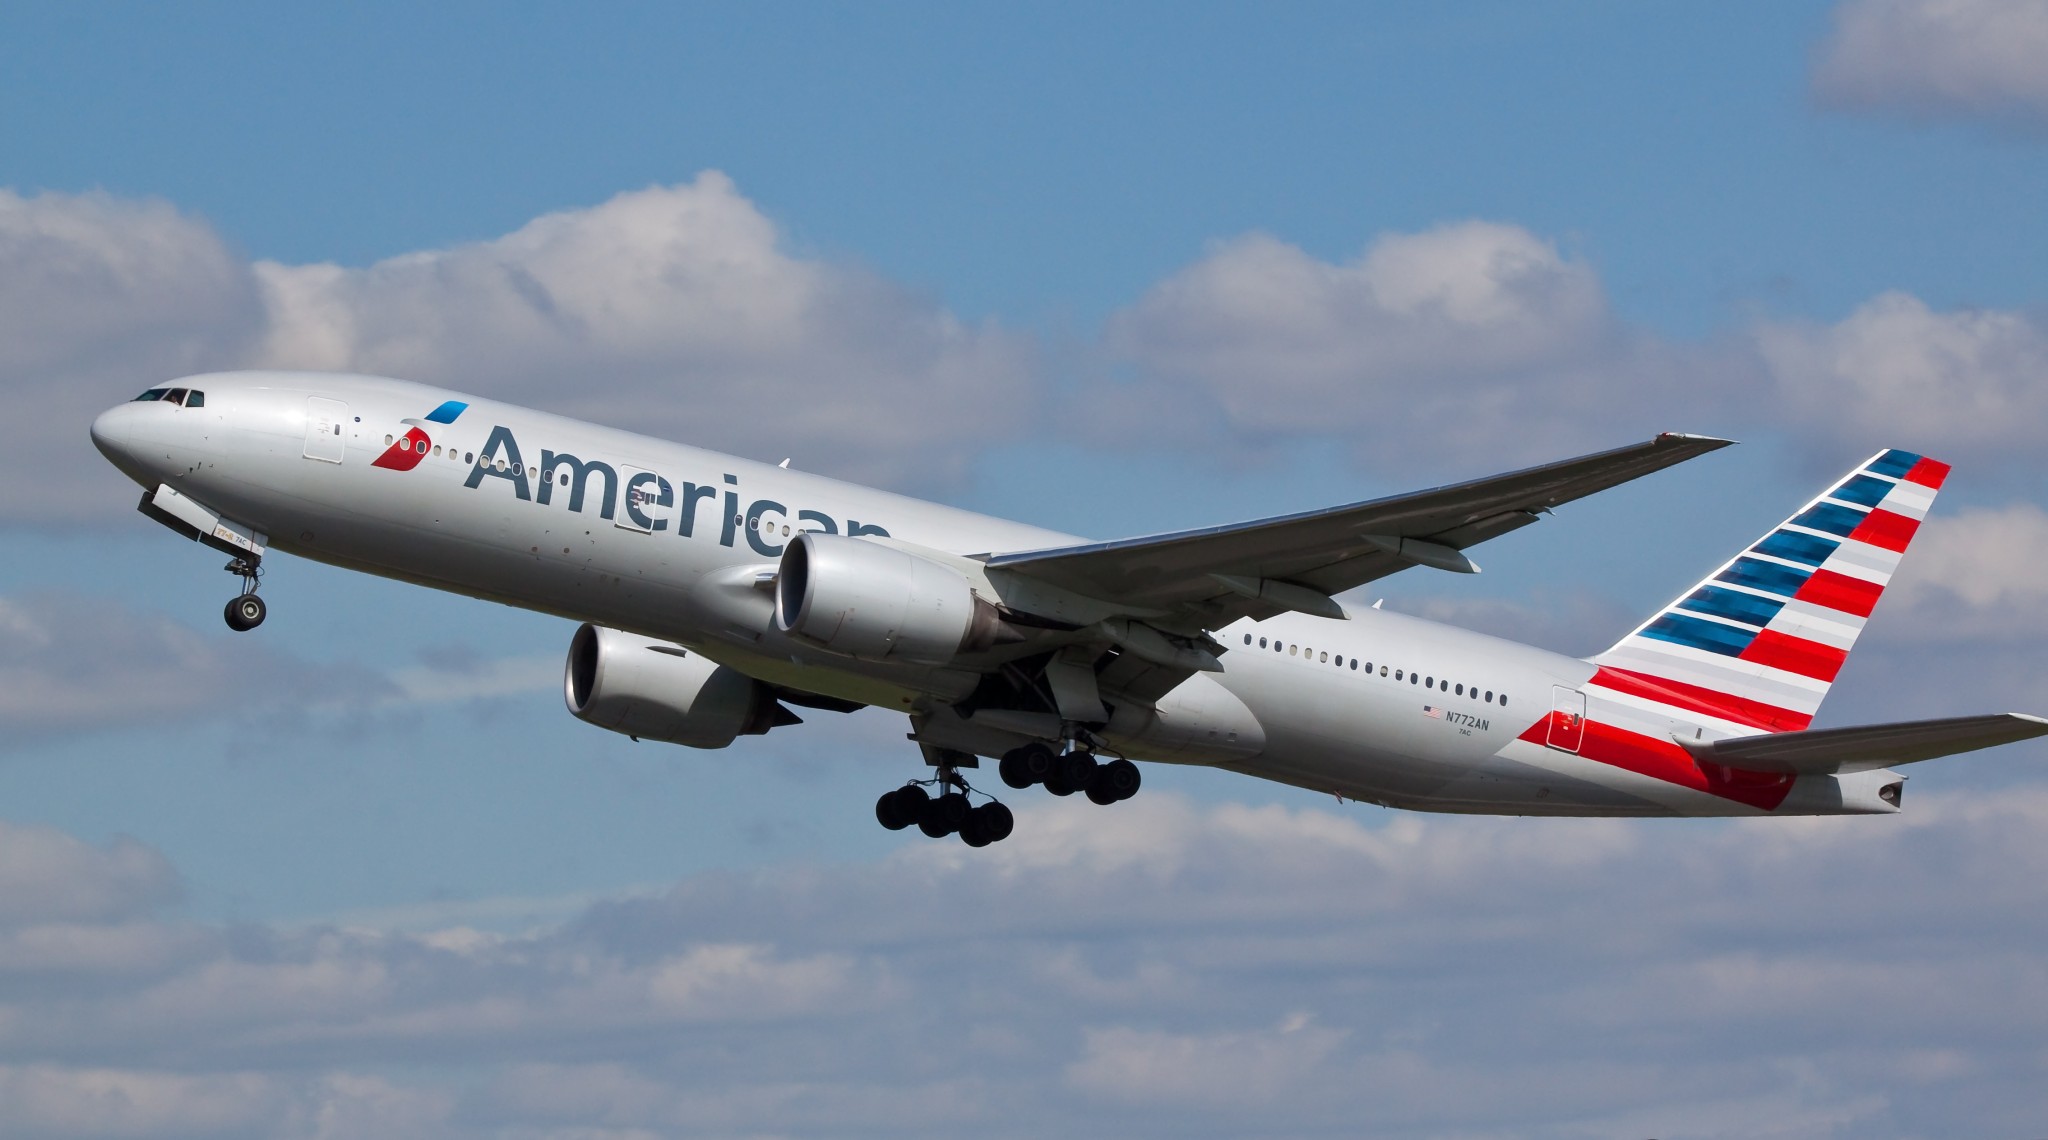 American Airlines moving more business to the cloud